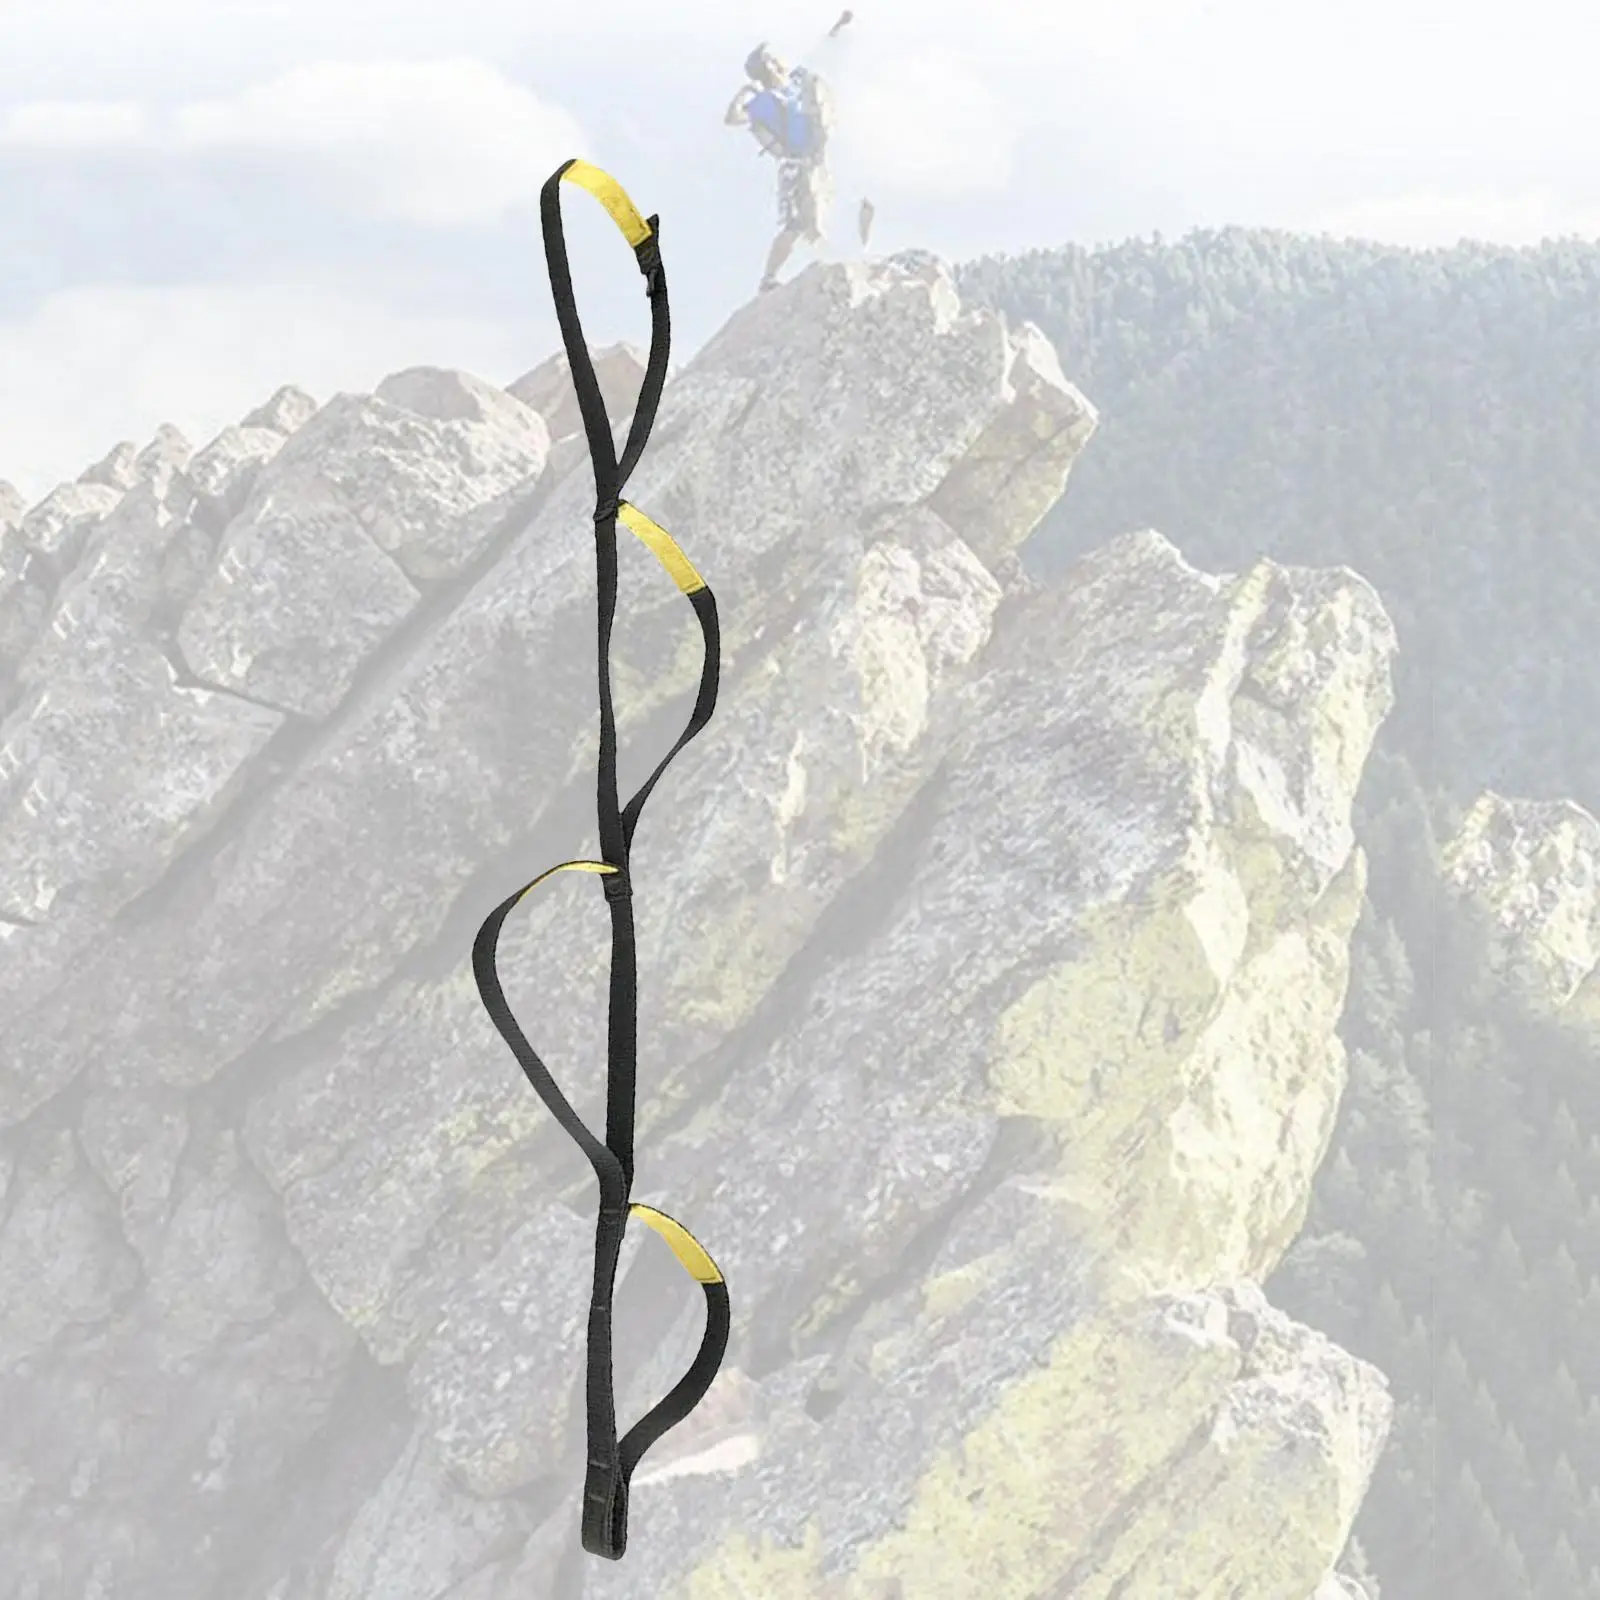 Lightweight Climbing Rope Aider Webbing Strap Ladder for Caving Swim Mountaineering